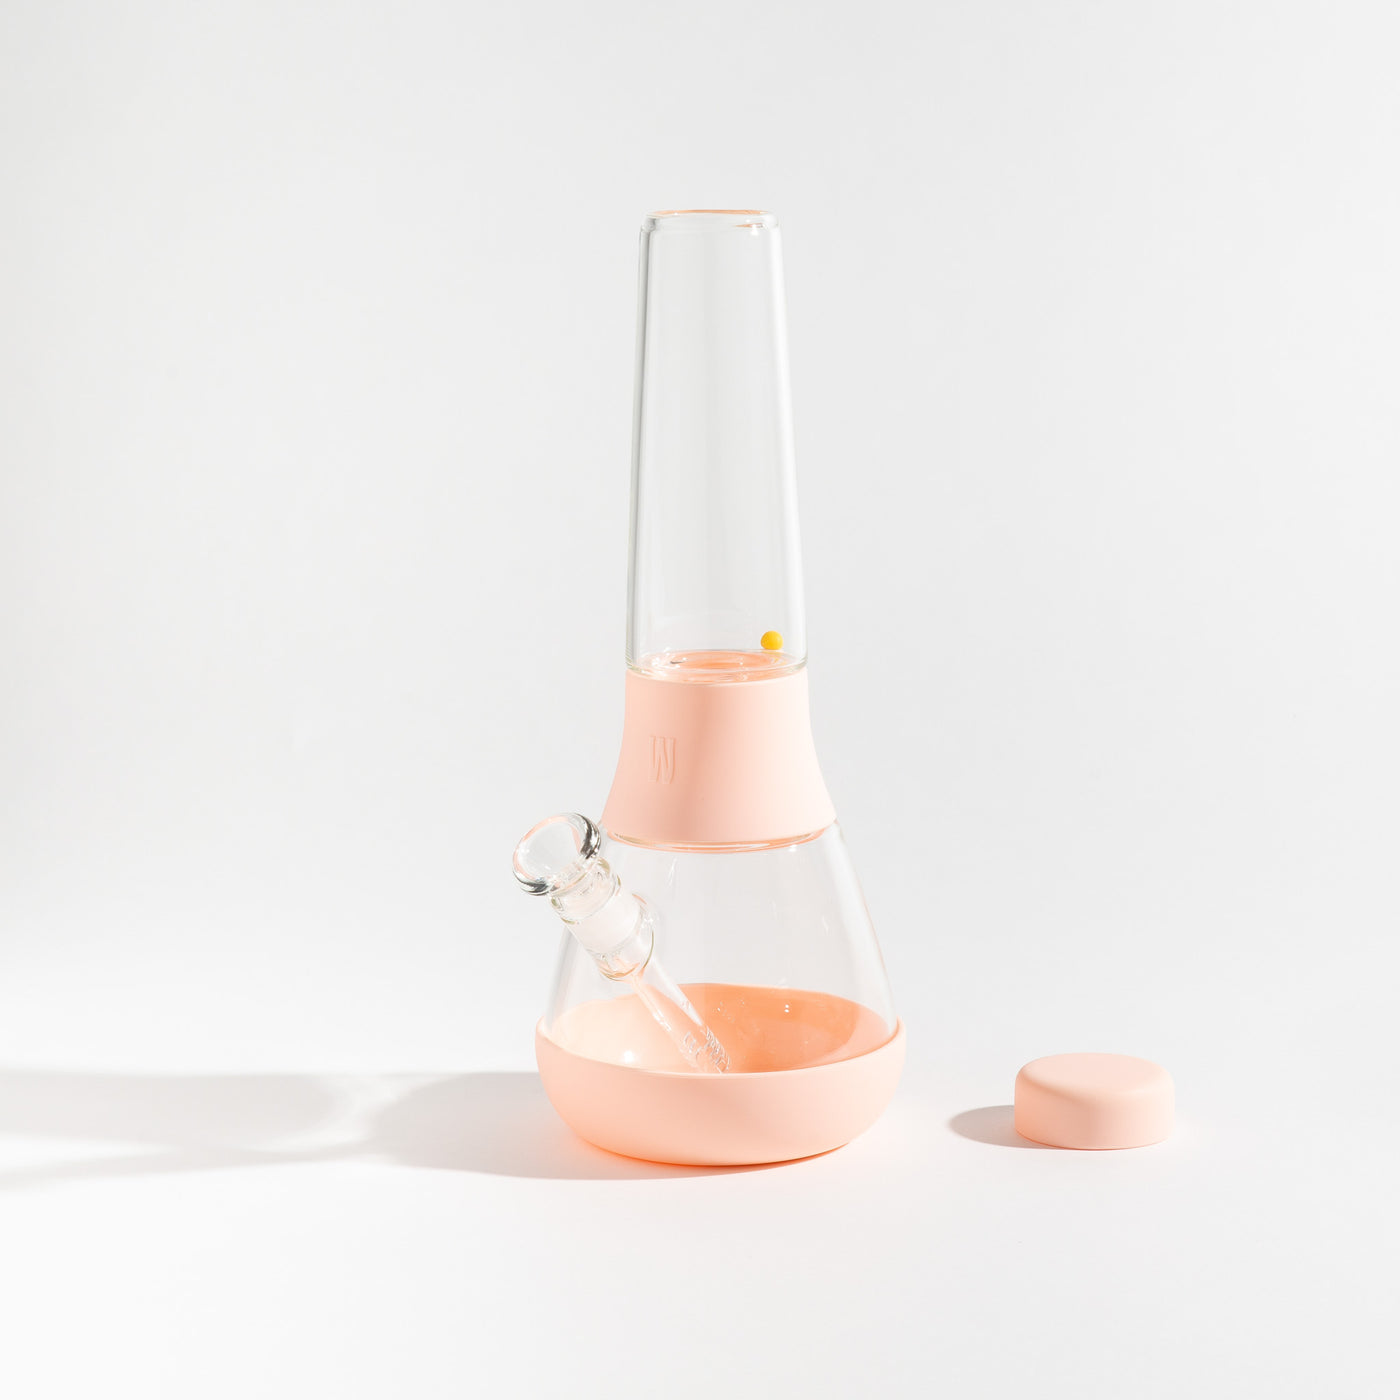 Product photo of a glass waterpipe with baby pink silicone covers, cap uncovered, placed on a table.